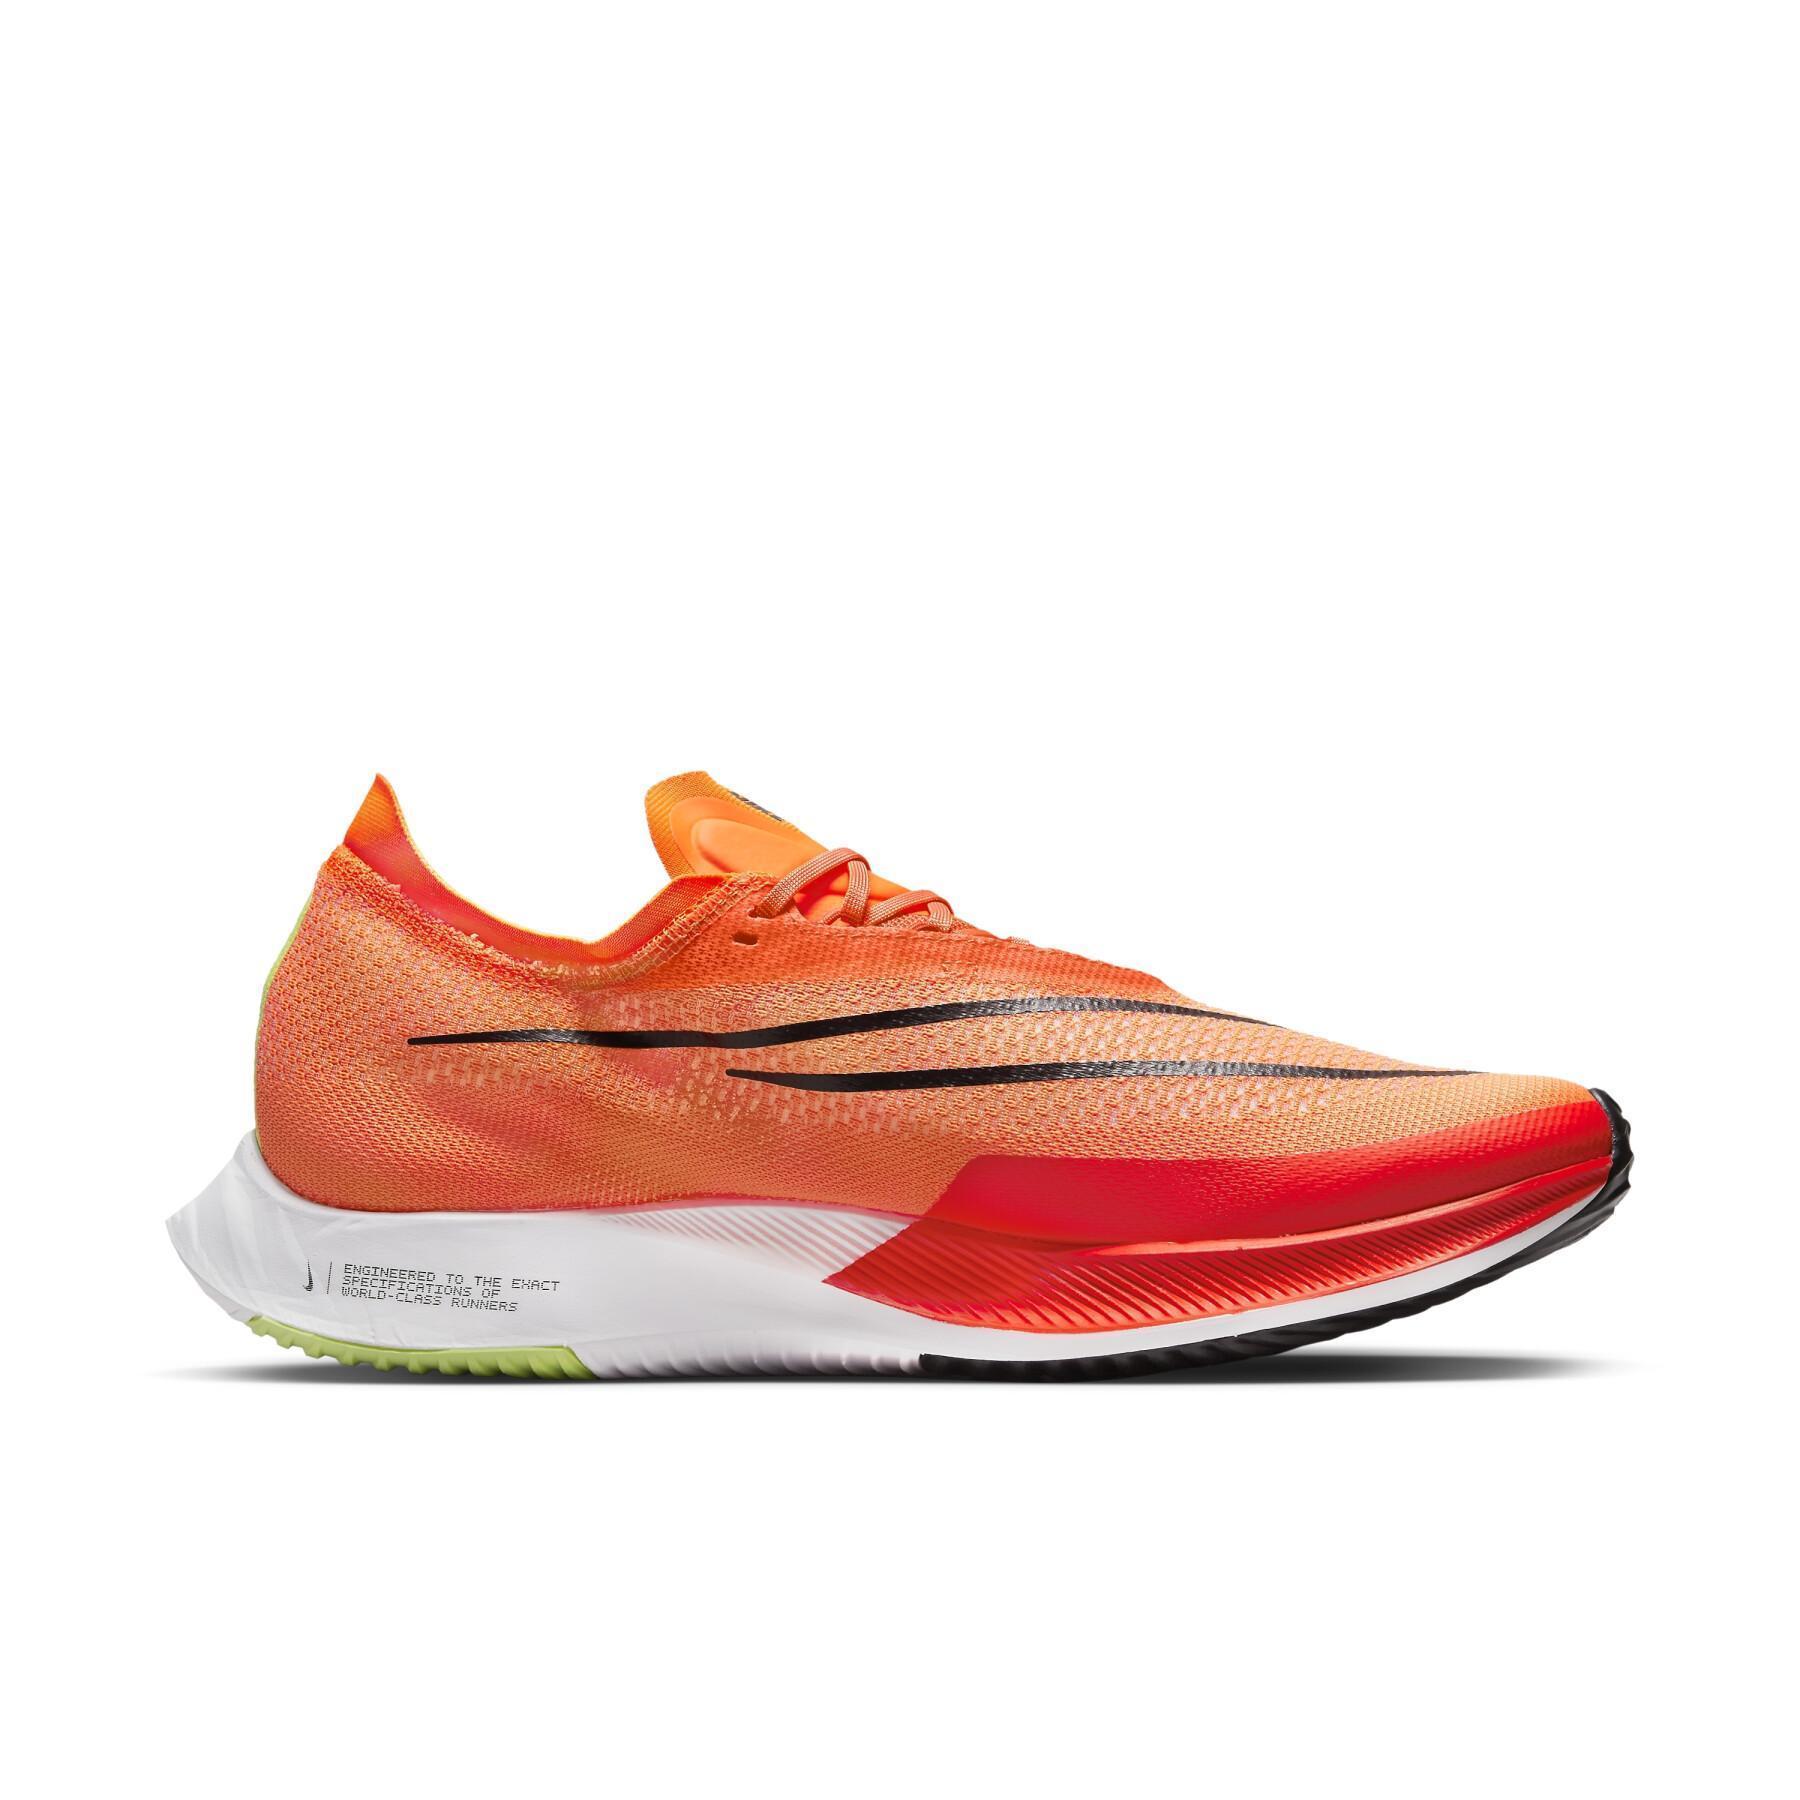 Running shoes Nike ZoomX Streakfly